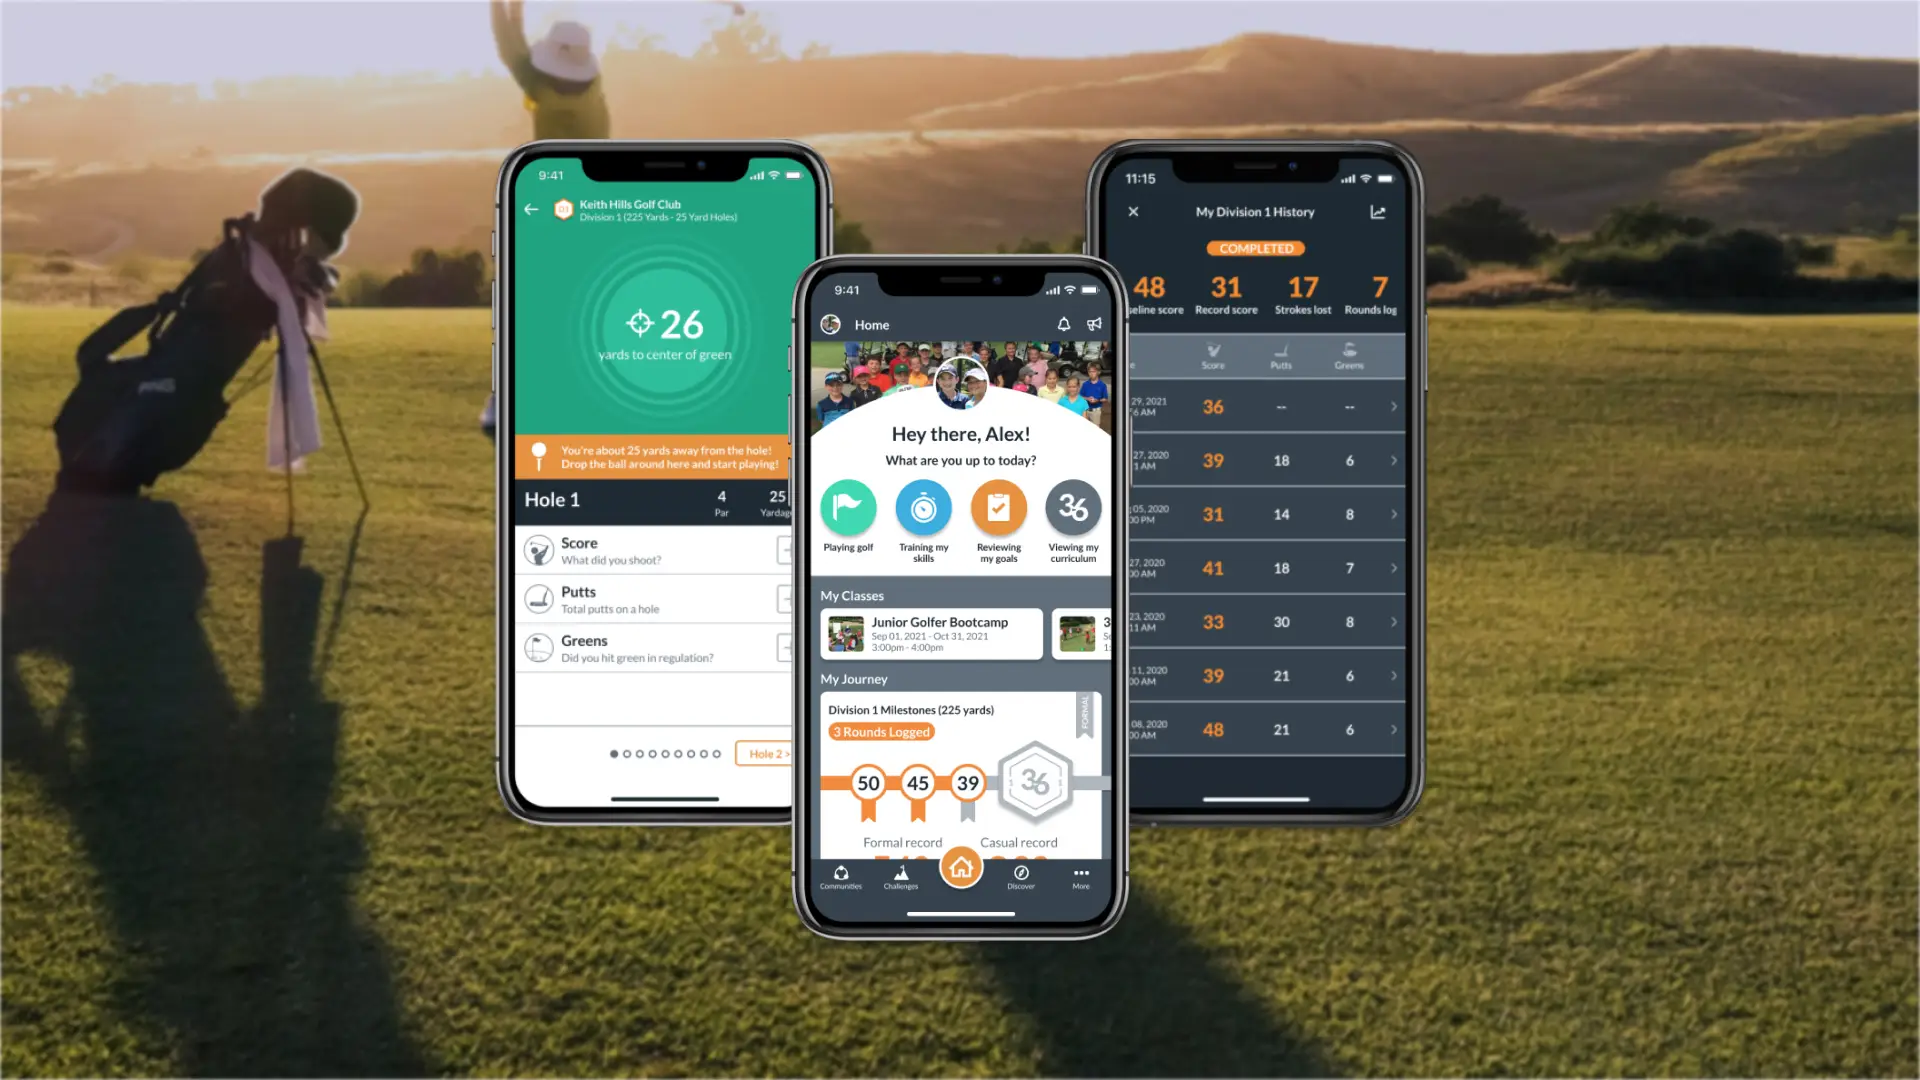 New GPS and scorecard view that helps golfers find their Op 36 Division tee box, Division Milestone progress bars for all Divisions, and a new list view of all scores logged in a Division